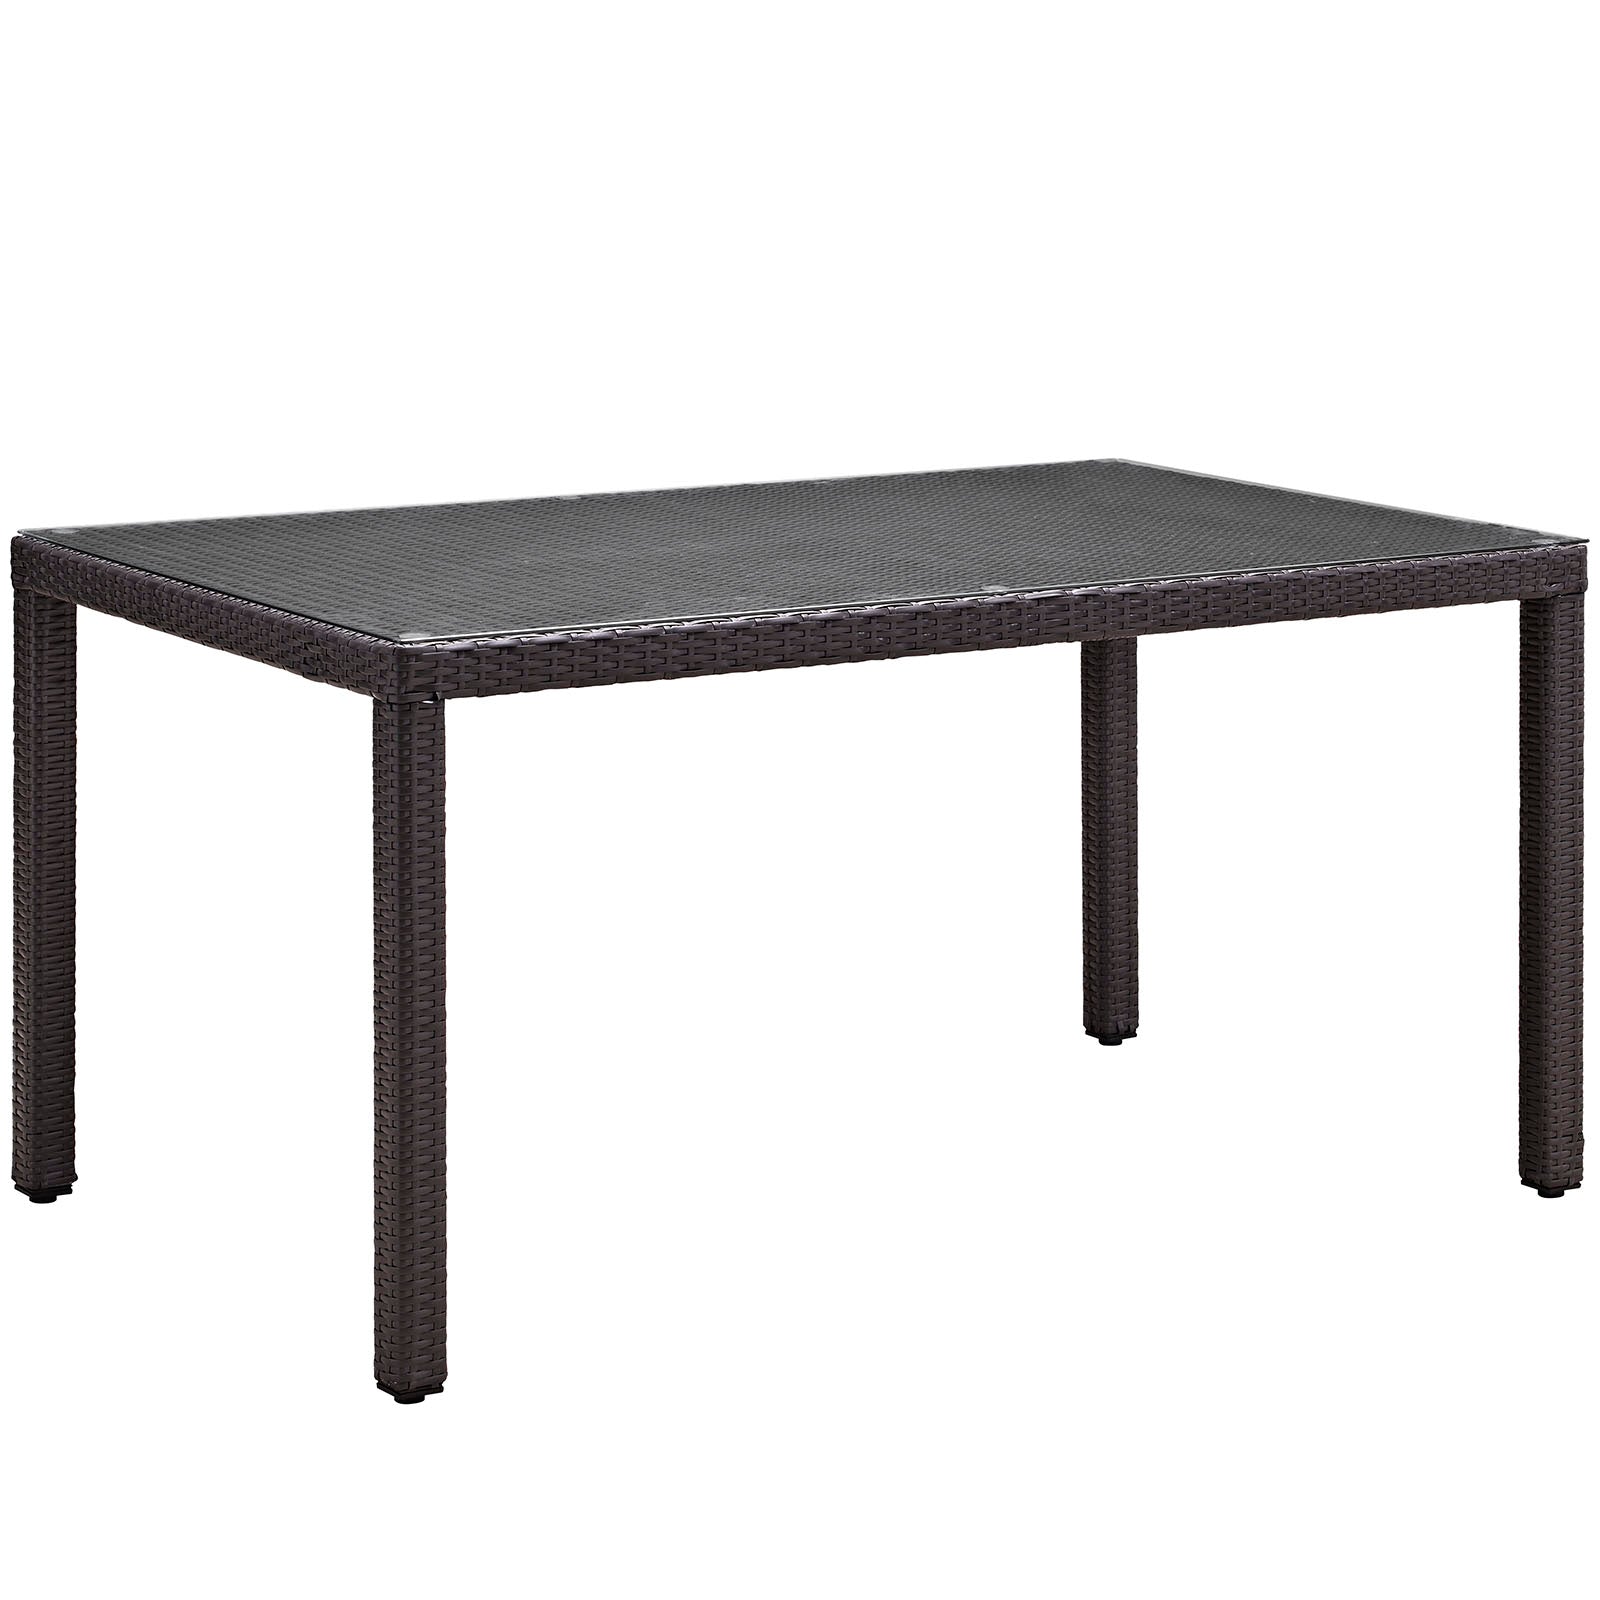 Convene 59" Outdoor Patio Dining Table - East Shore Modern Home Furnishings